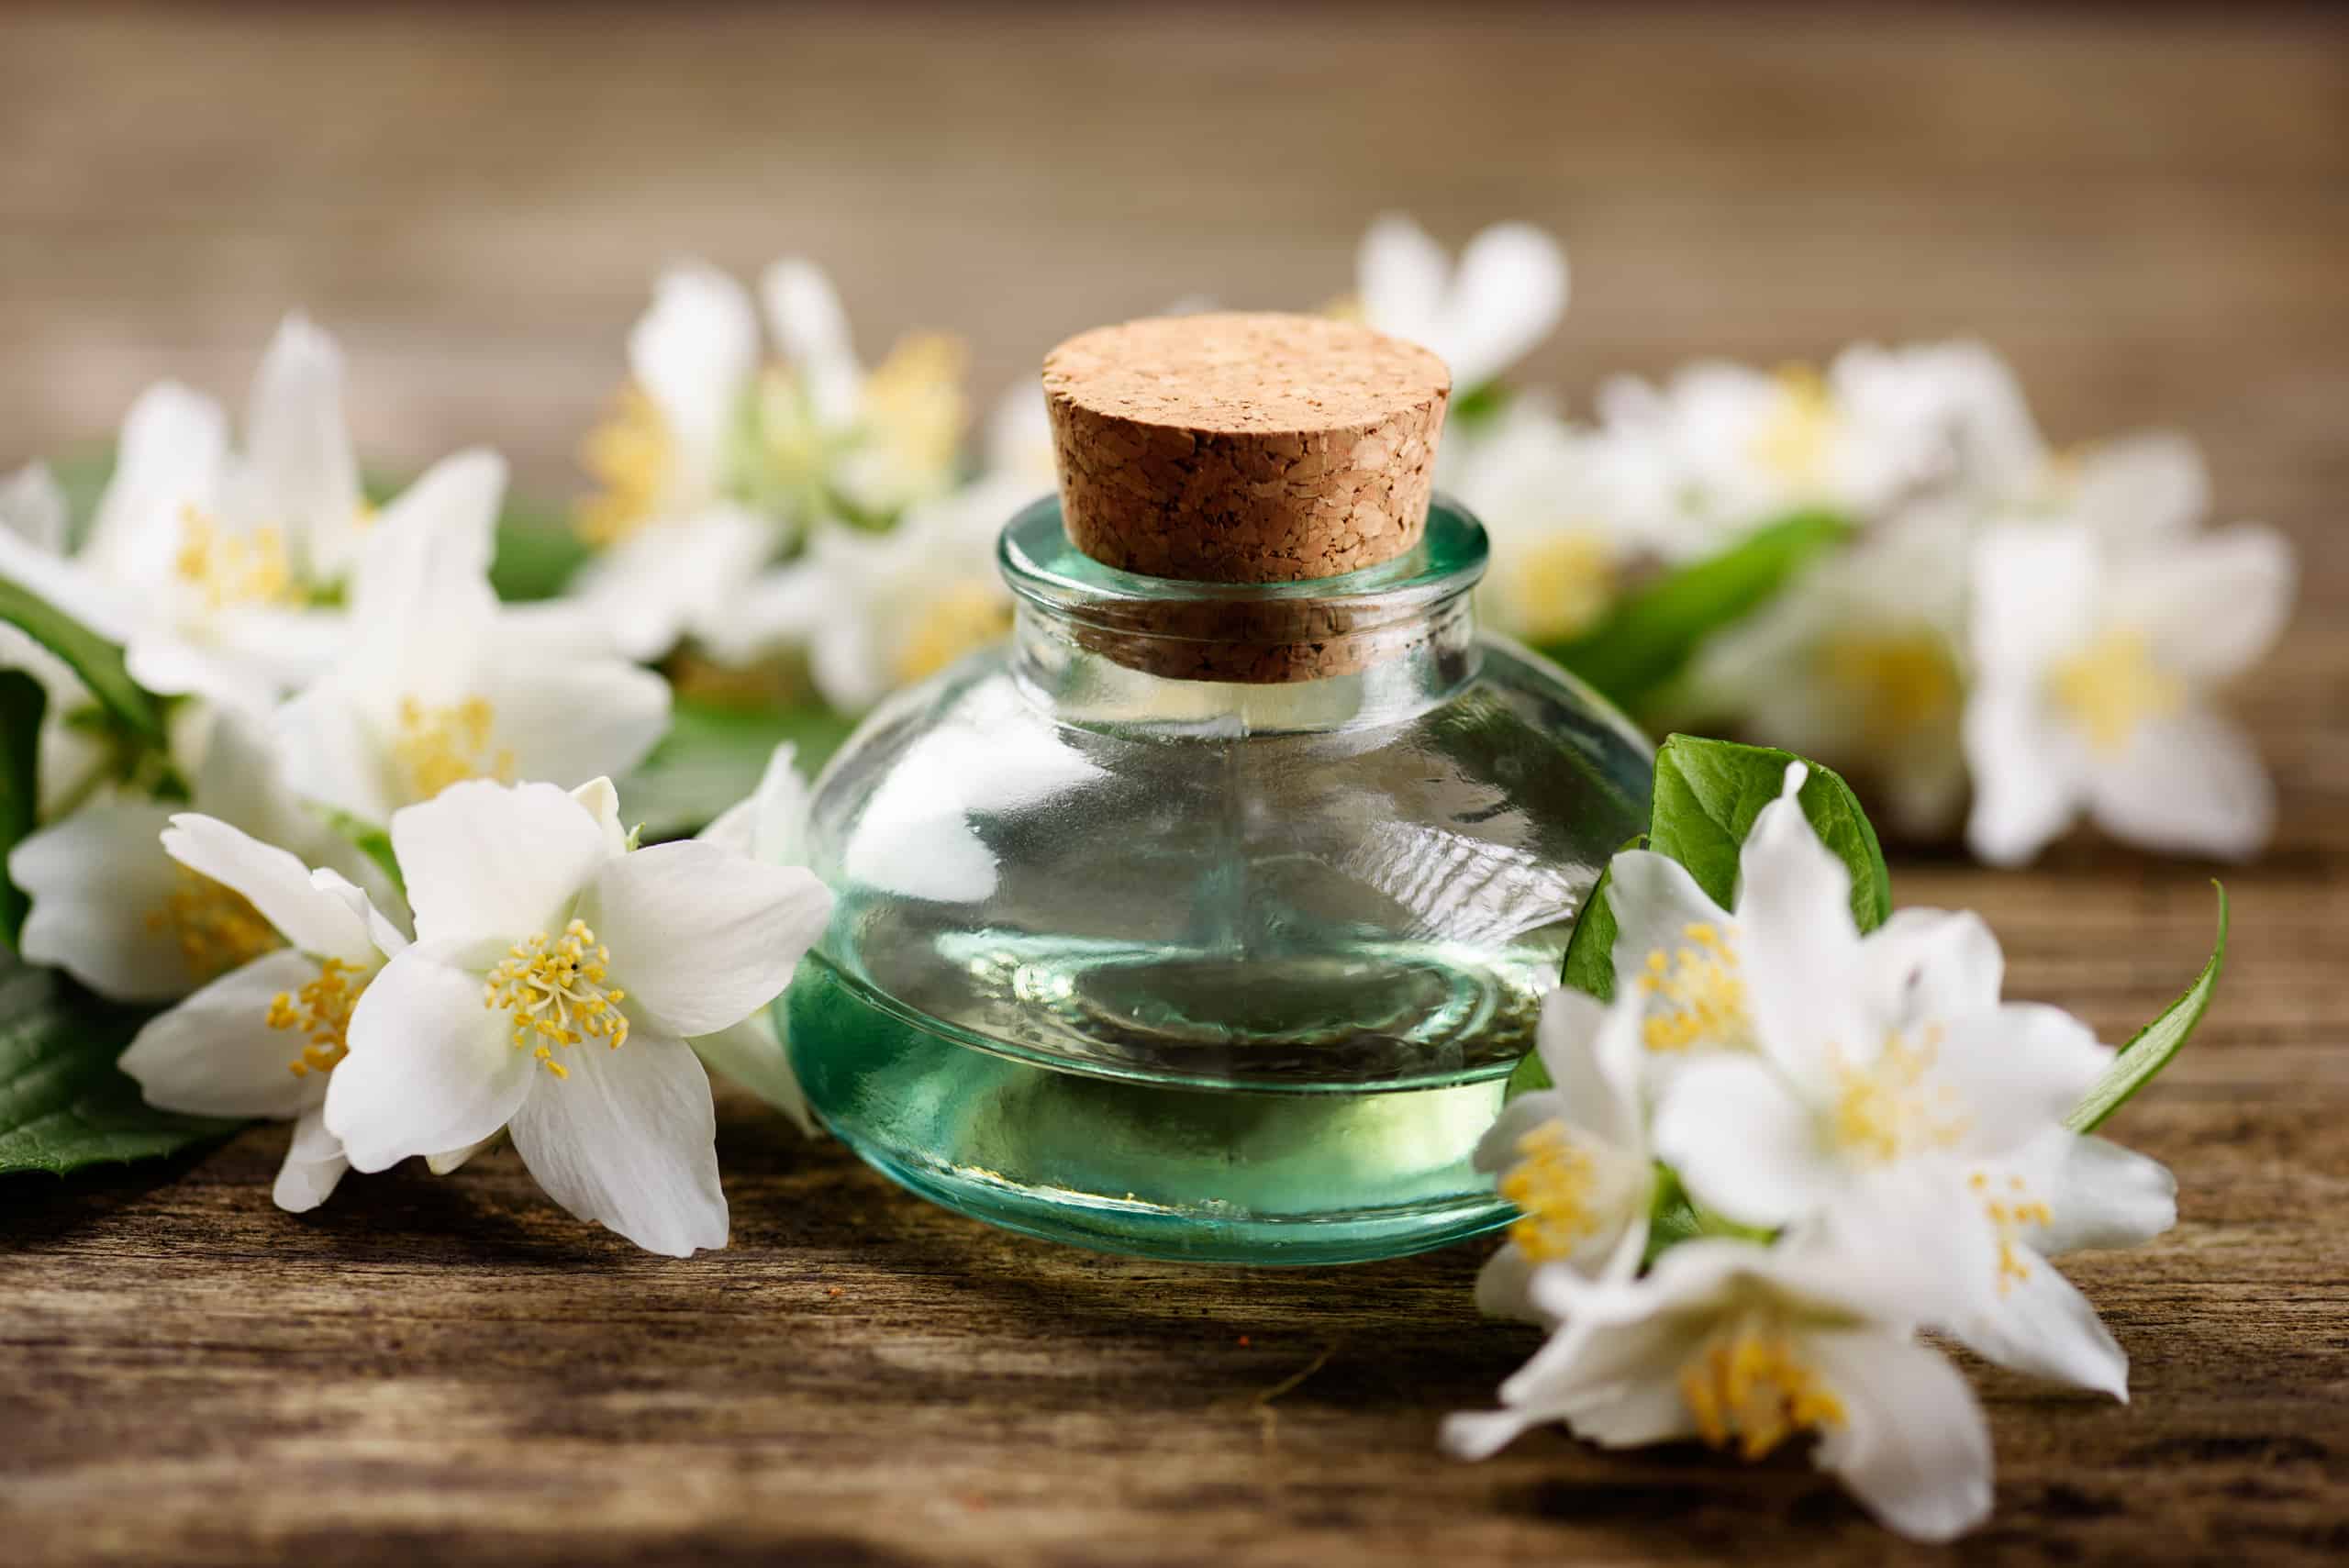 Aromatherapy Safety: Tips for Using Essential Oils Responsibly